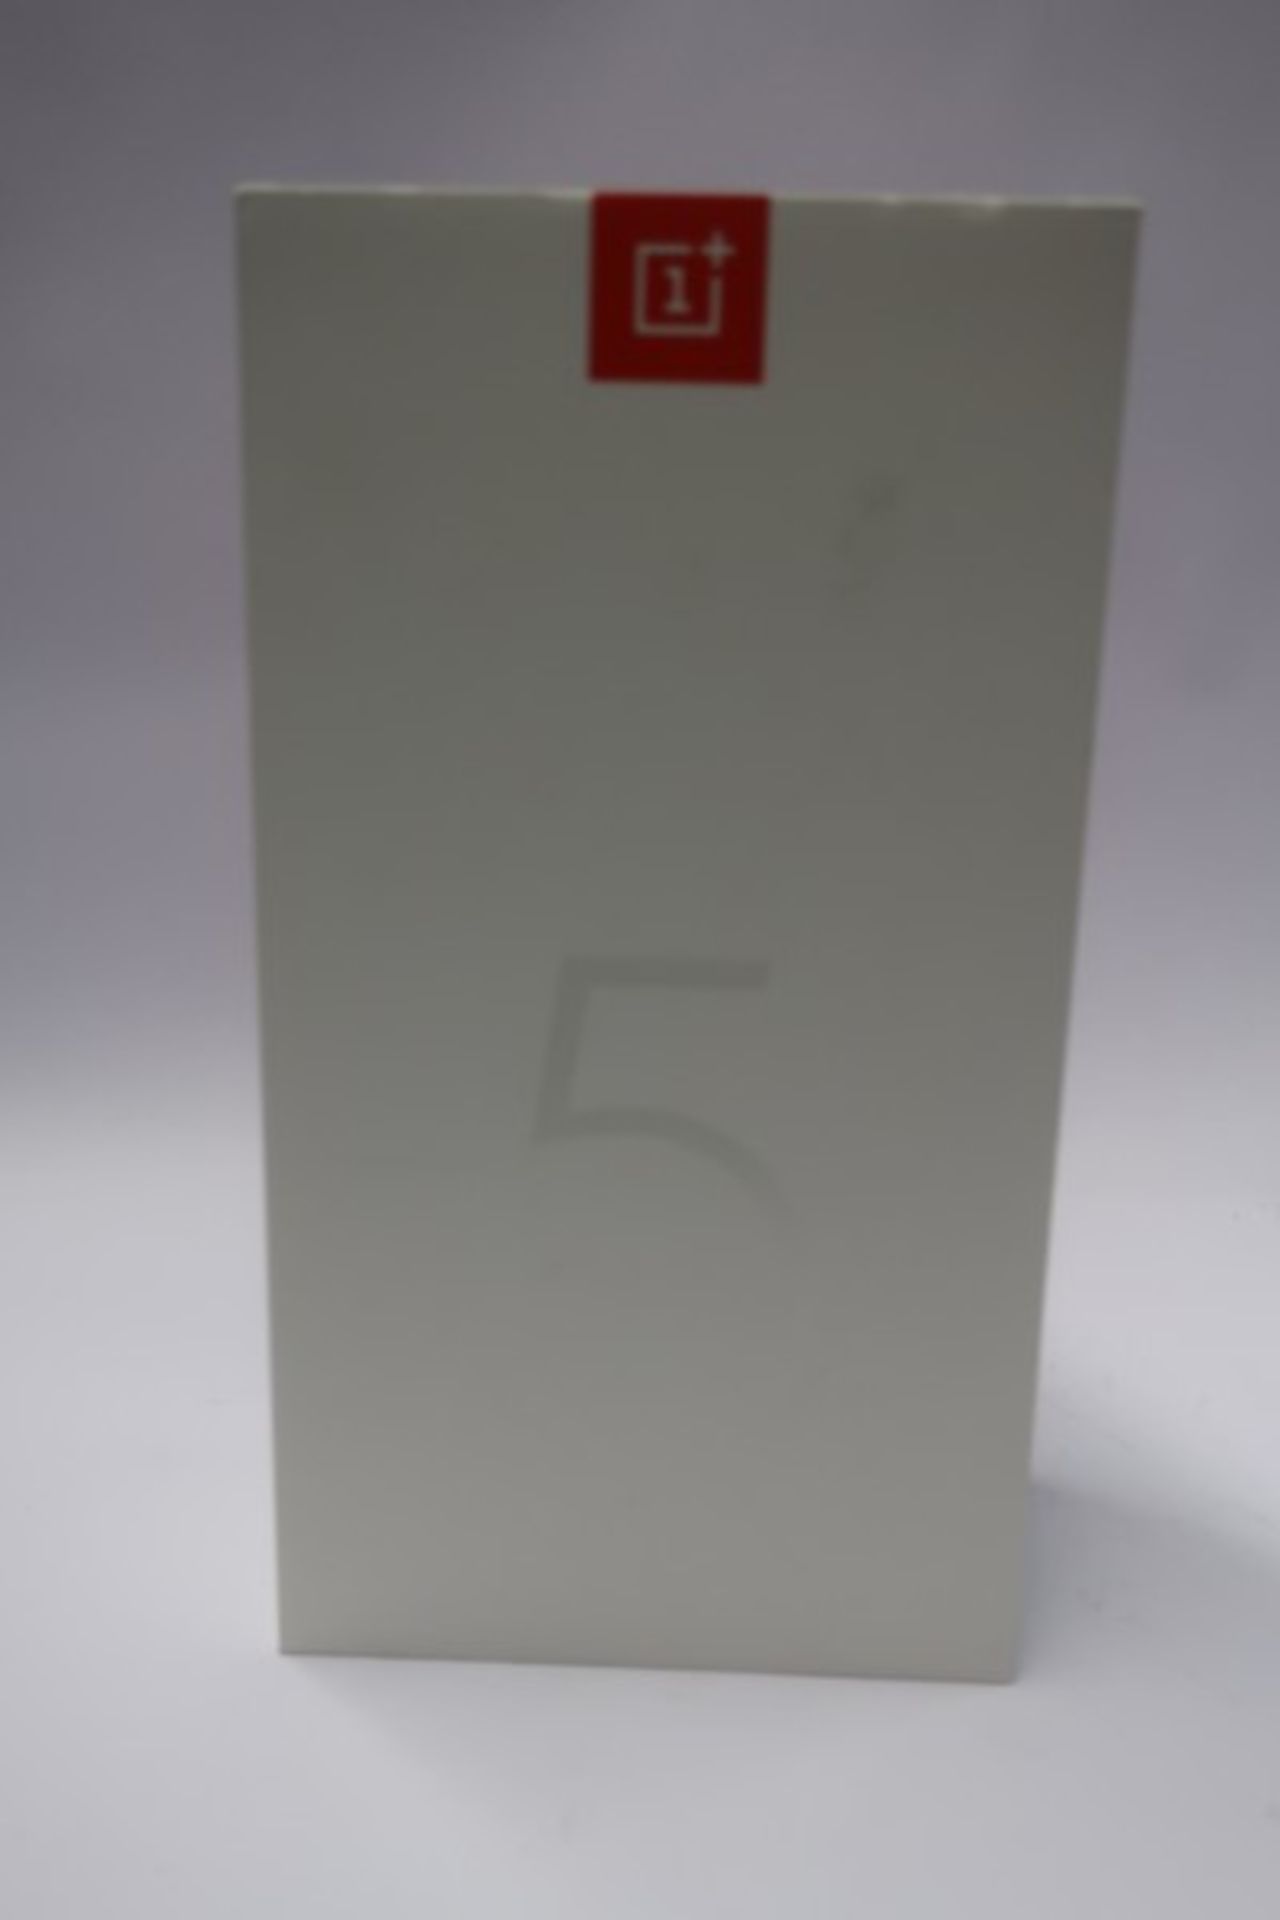 A boxed as new OnePlus 5T A5010 64GB dual sim smartphone (IMEI: 868717039843511 / 868717039843503).